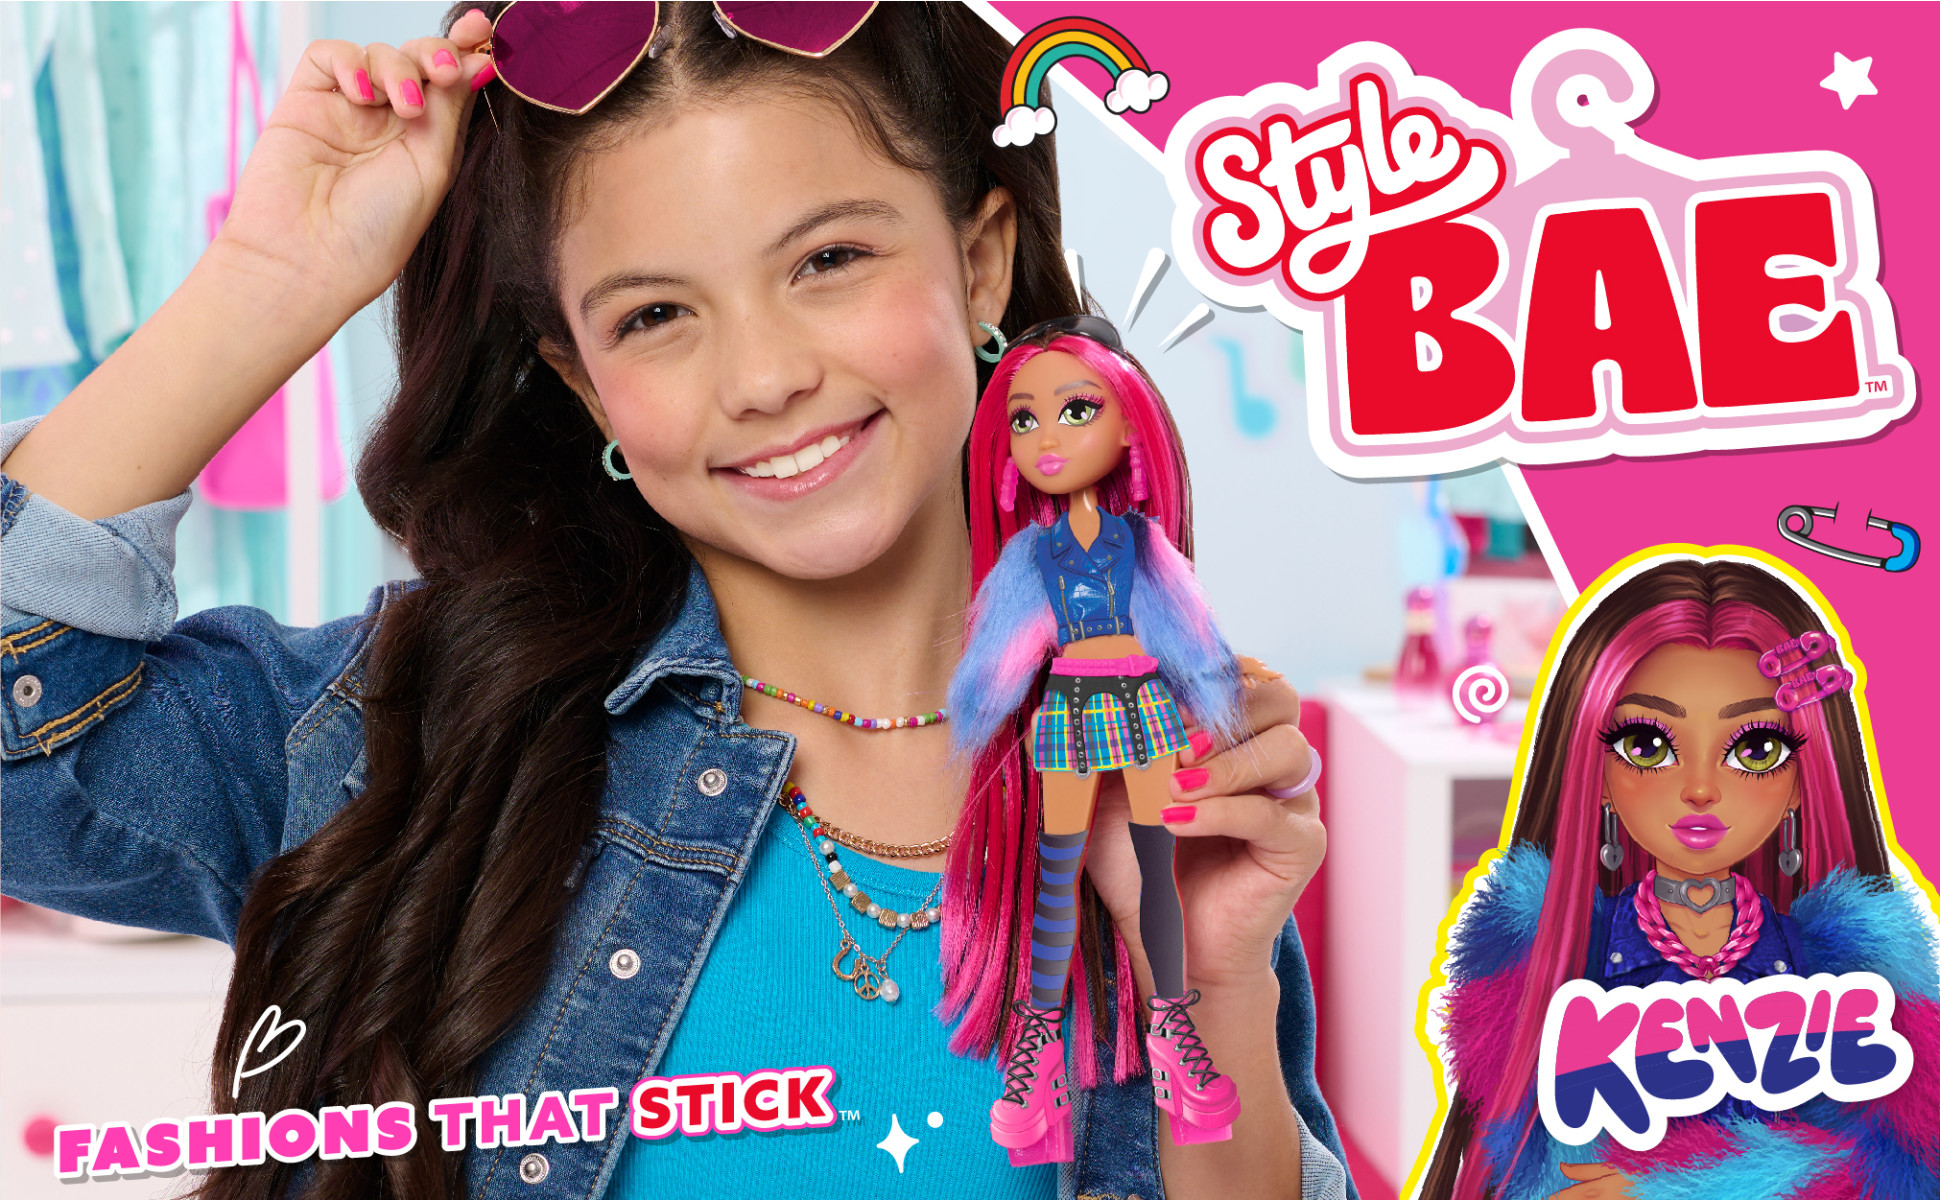 Style Bae Kenzie 10 Fashion Doll and Accessories - Macy's